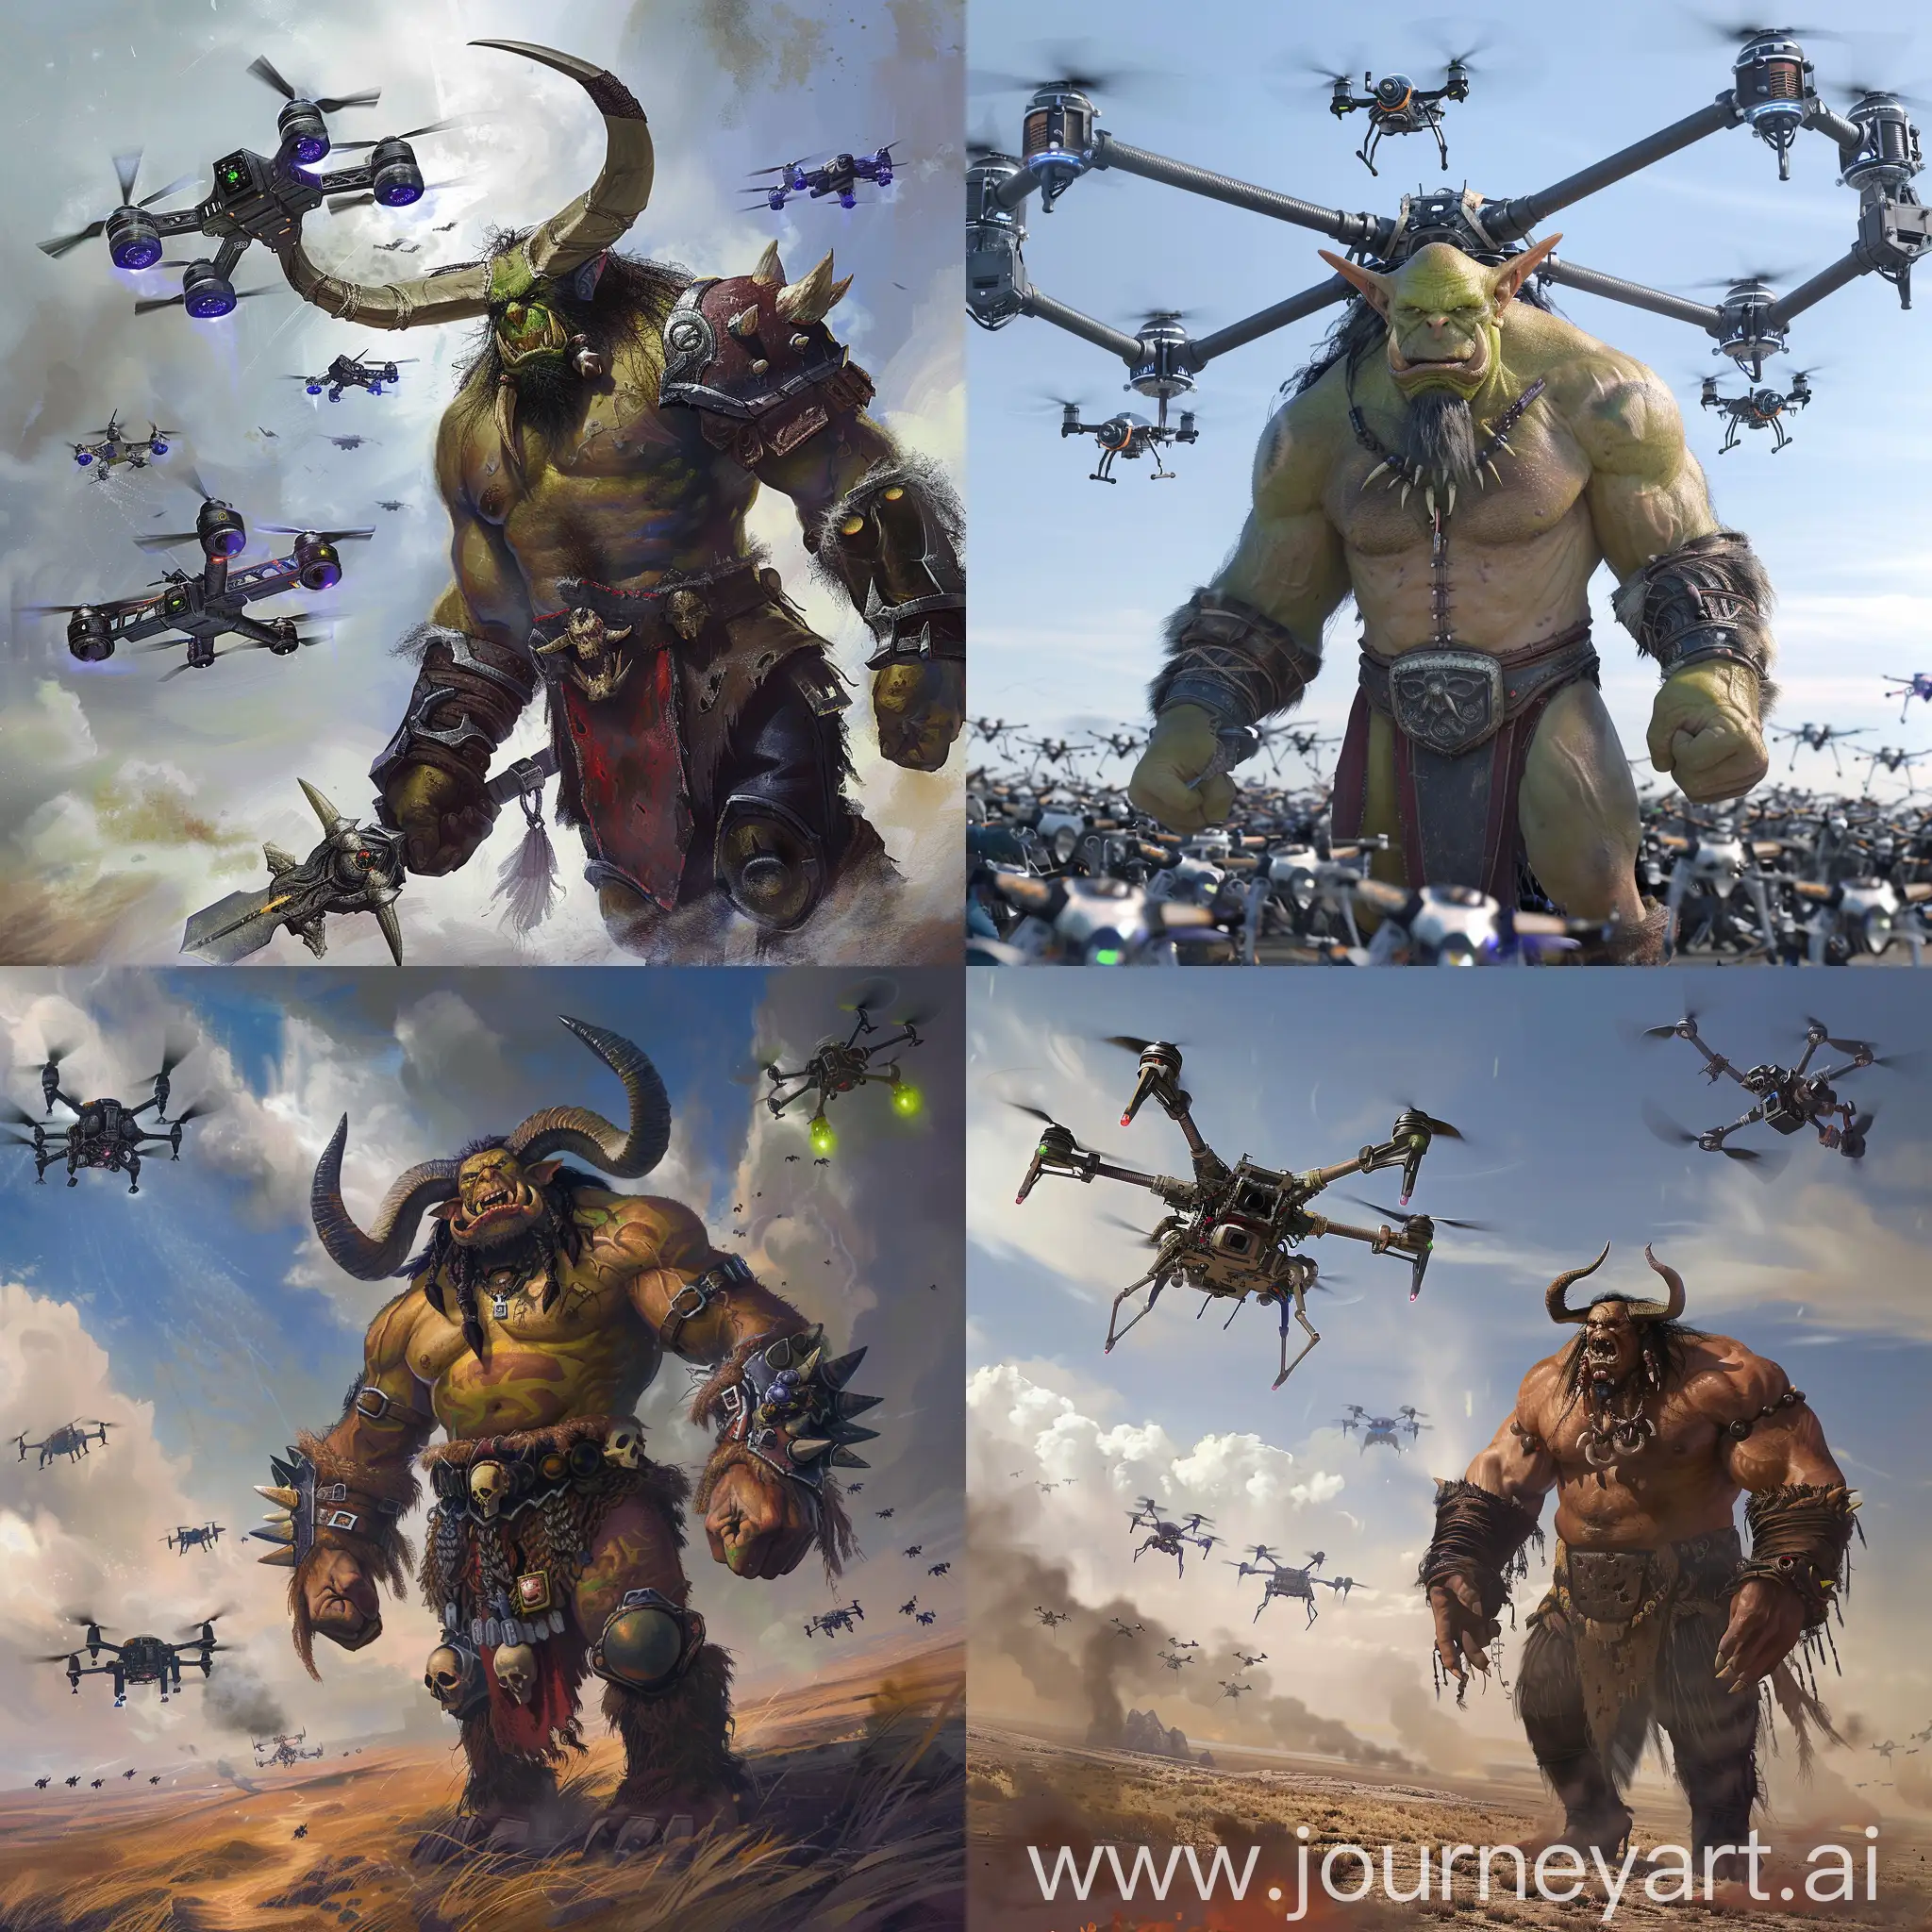 Furious-Thrall-Confrontation-with-Drones